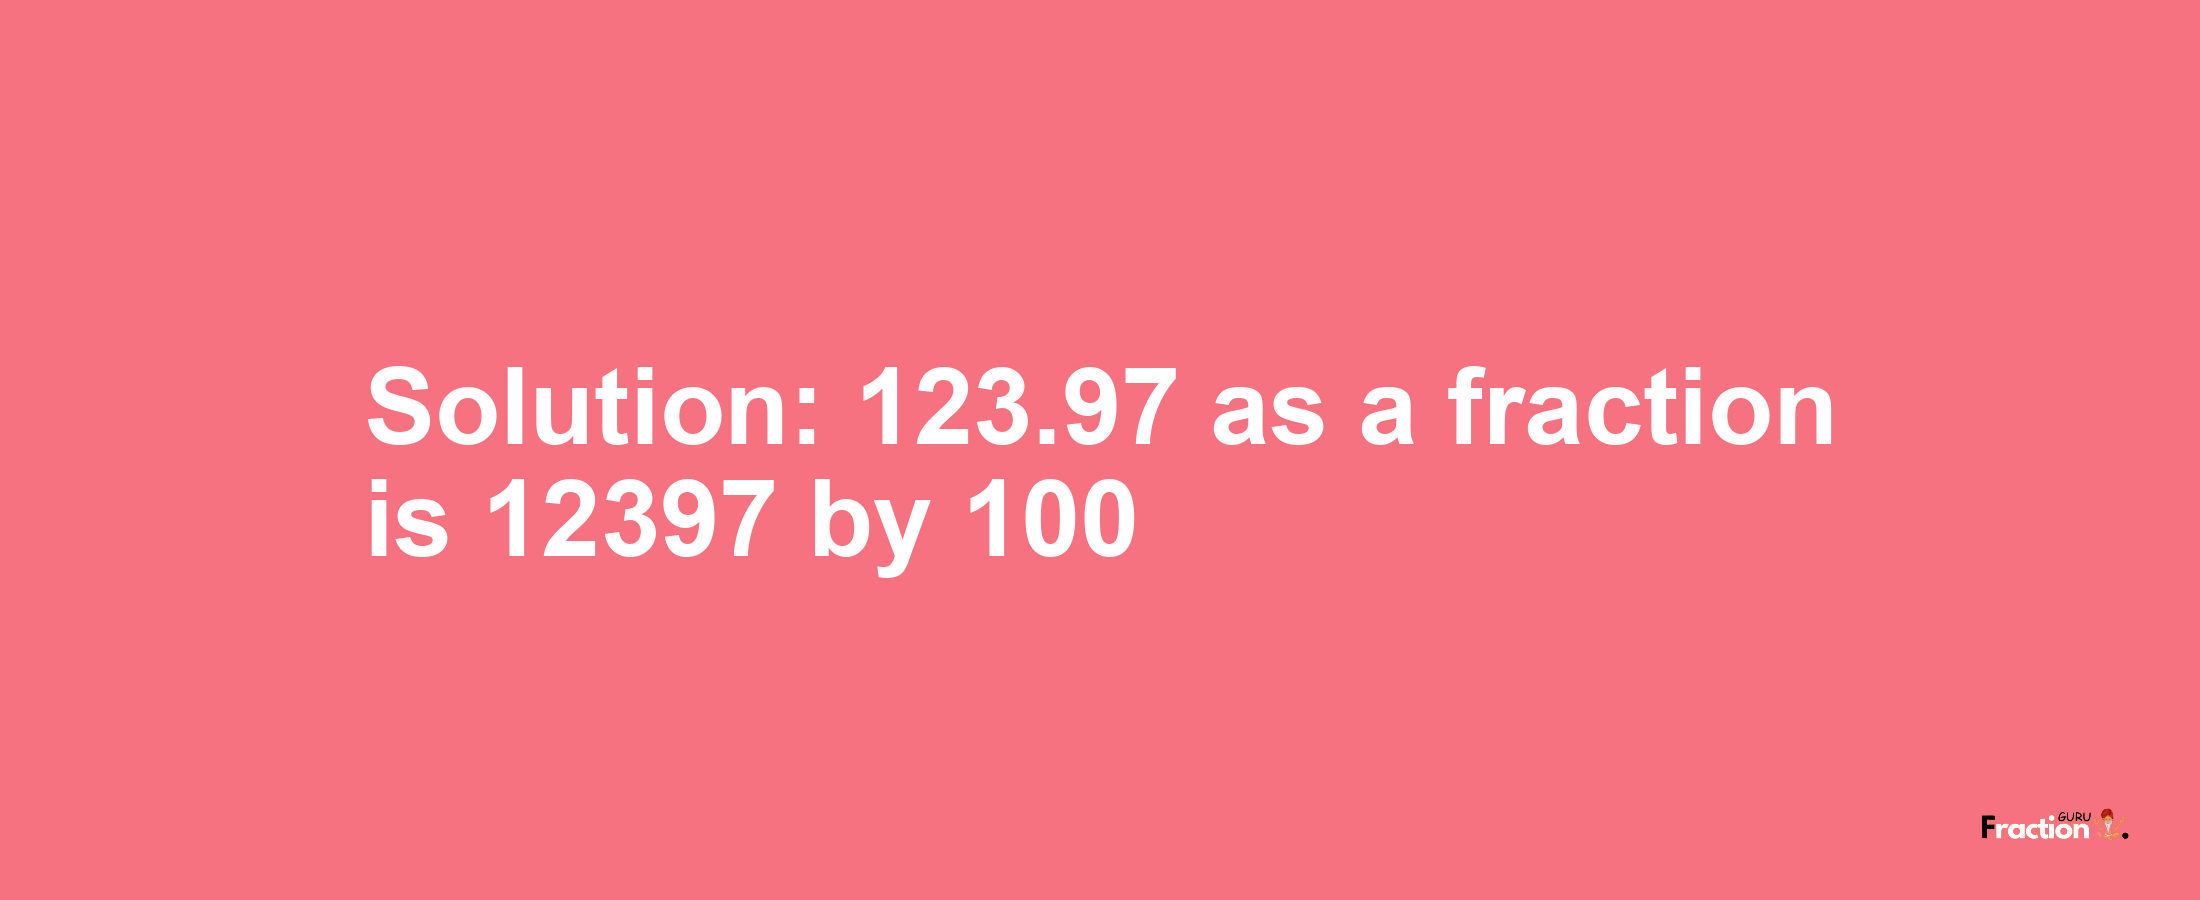 Solution:123.97 as a fraction is 12397/100